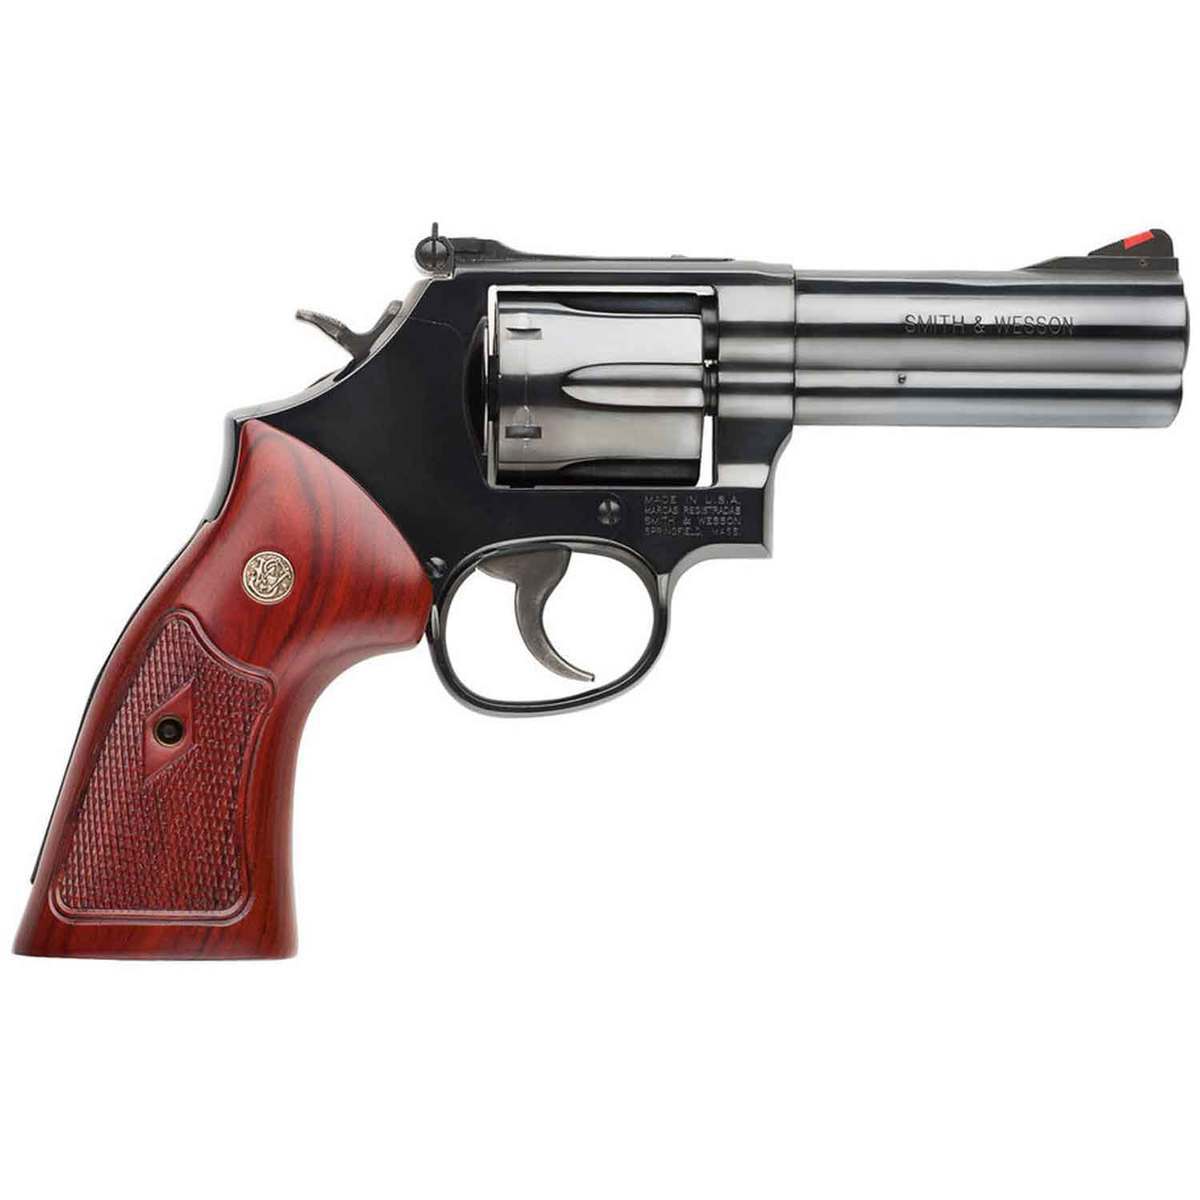 Smith And Wesson Model 586 357 Magnum 4in Blued Revolver 6 Rounds Sportsmans Warehouse 6919